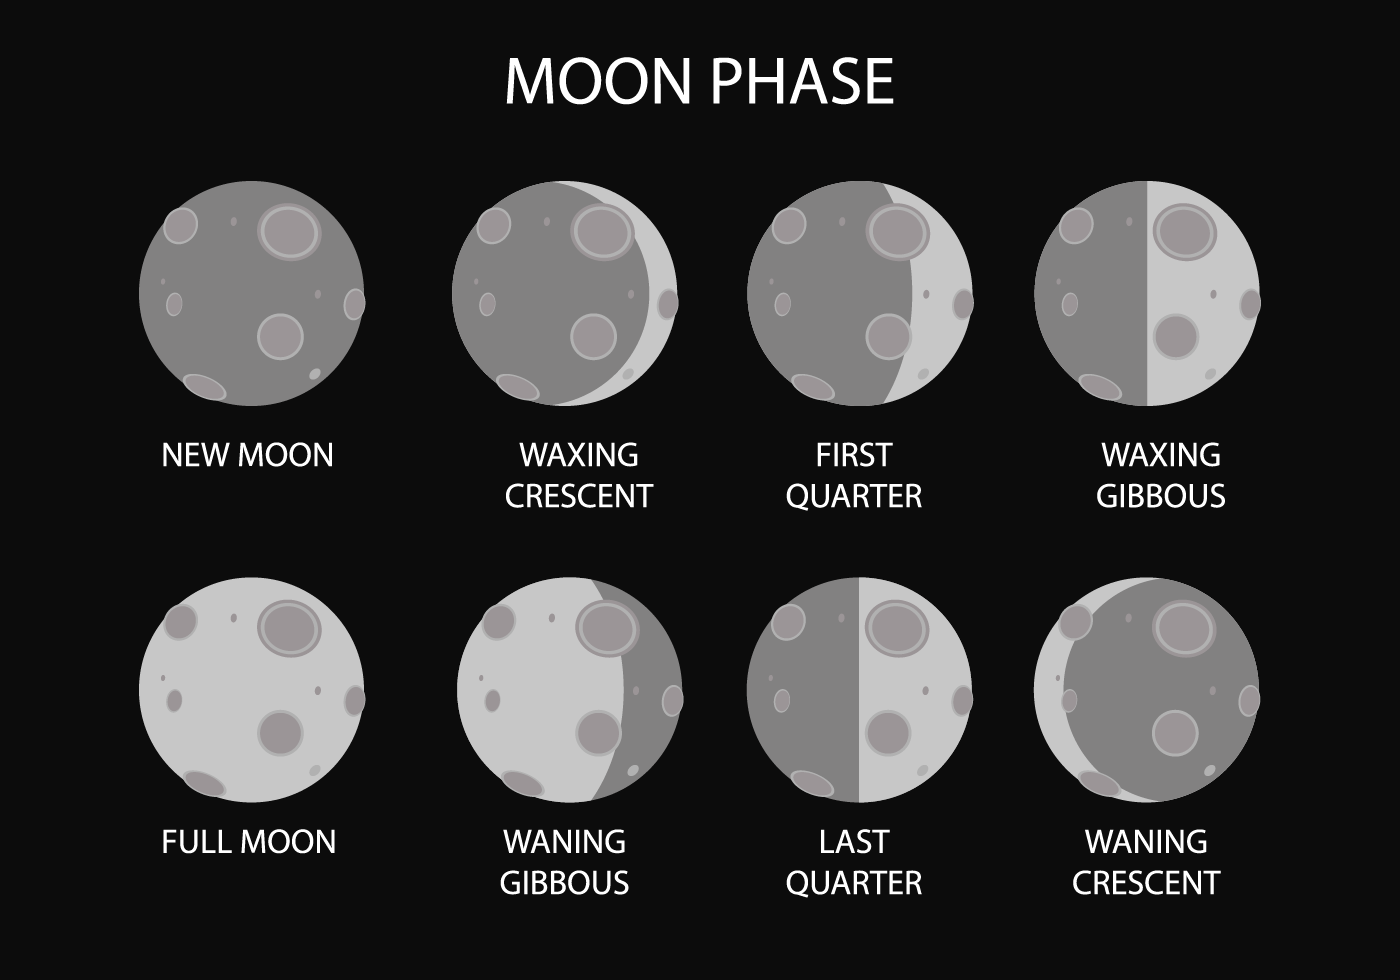 Download Free Moon Phase Vector for free.